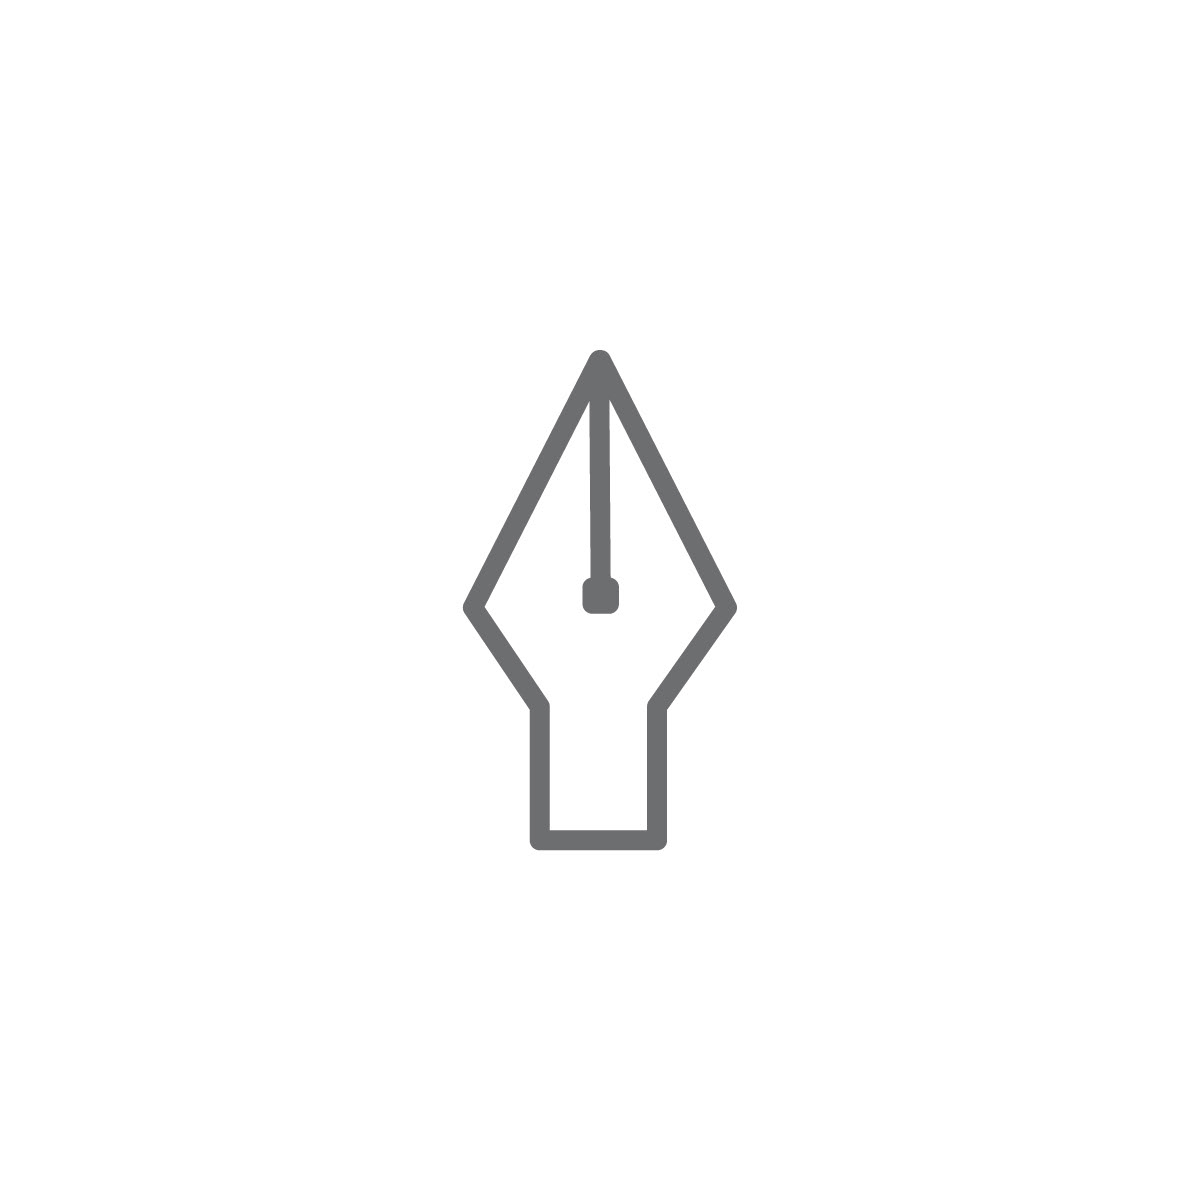 illustrations icons Pointer pen design Uncategorized experiments examples